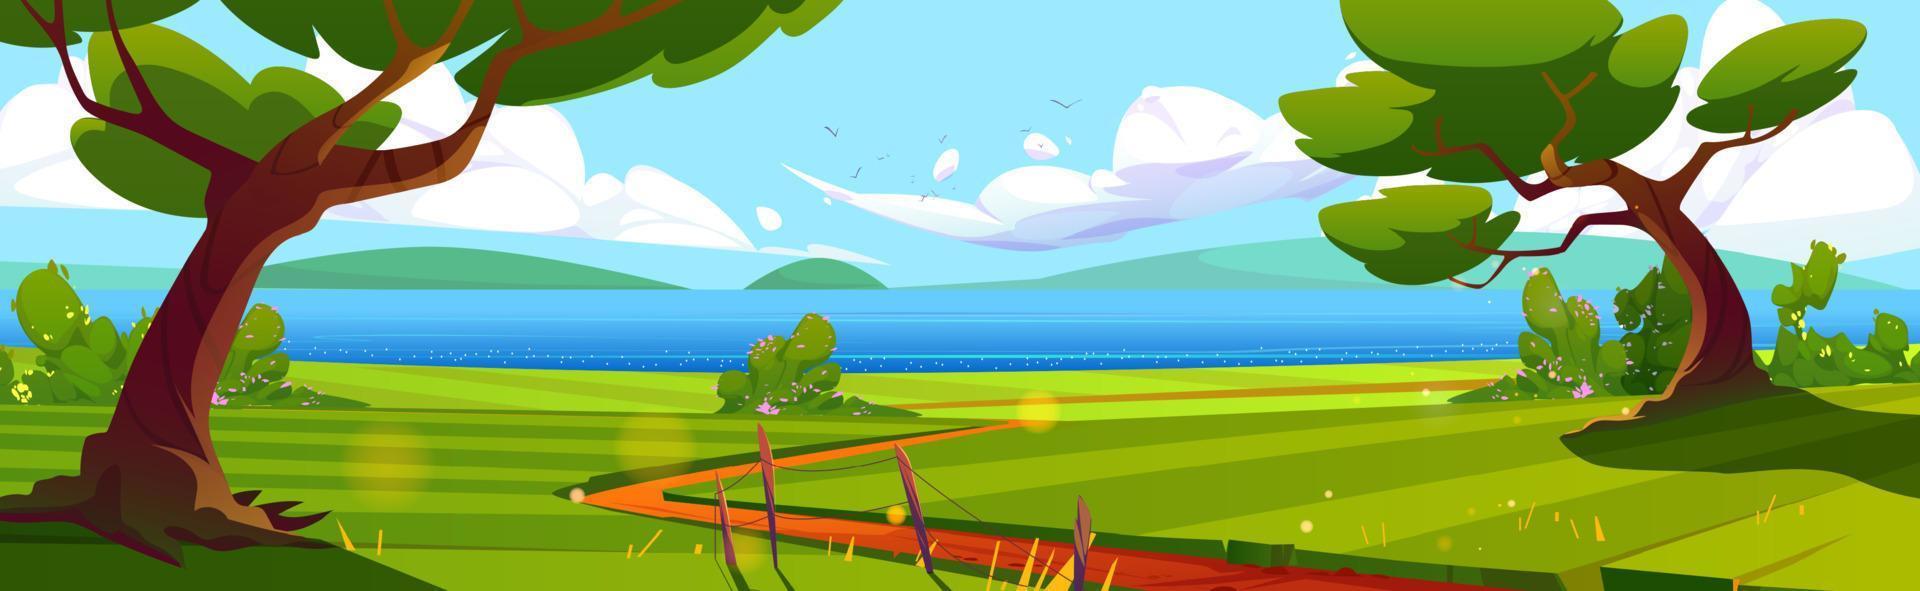 Summer landscape, blue lake and green field vector